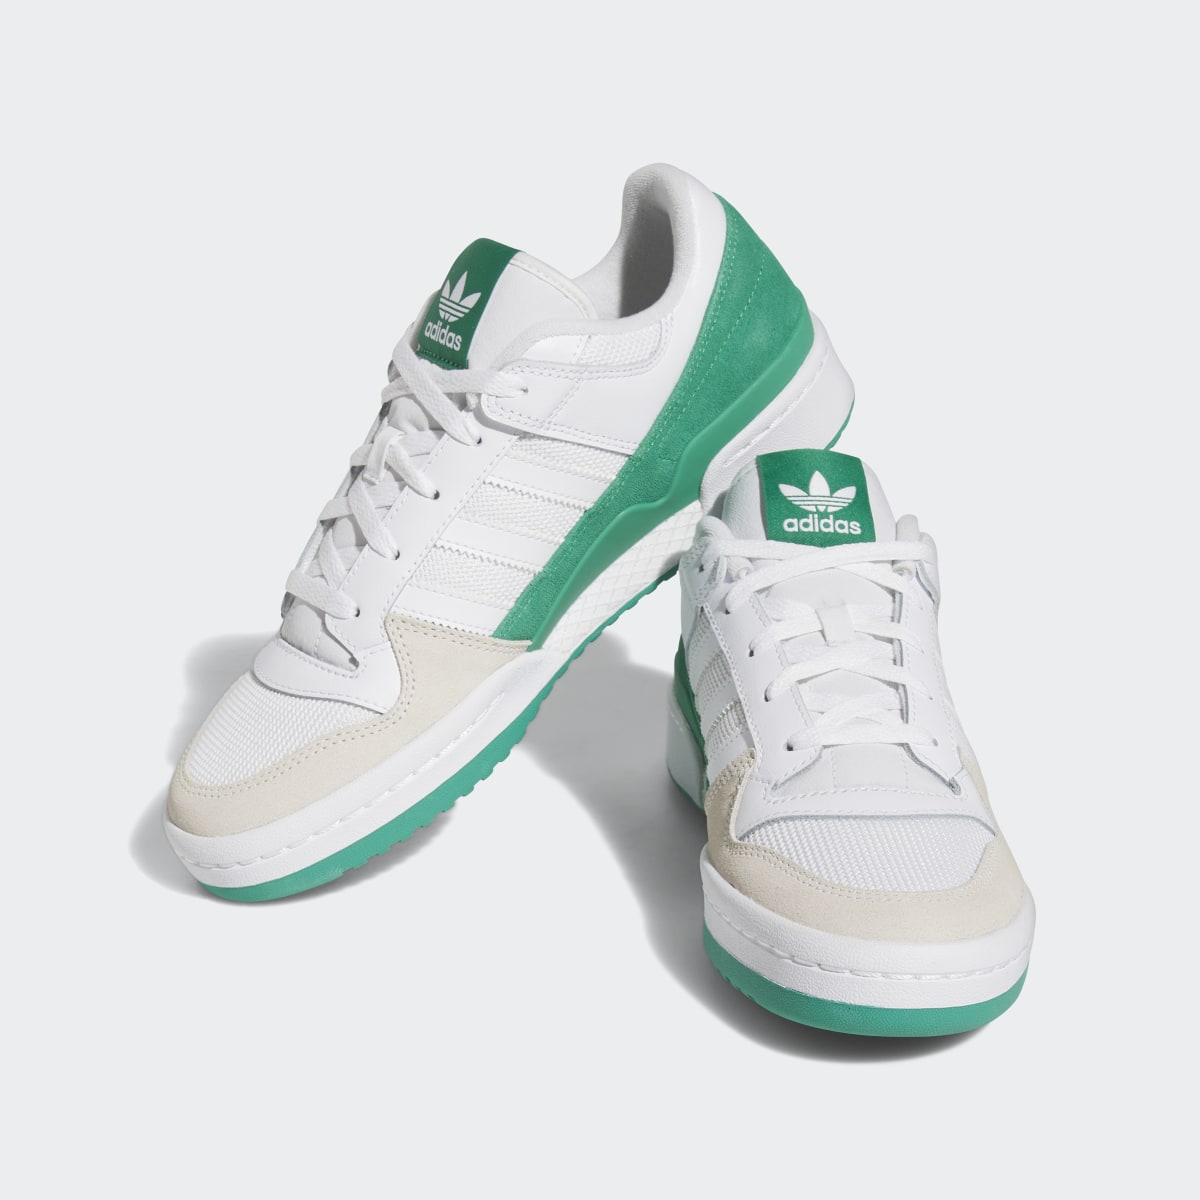 Adidas Forum Low Classic Shoes. 5